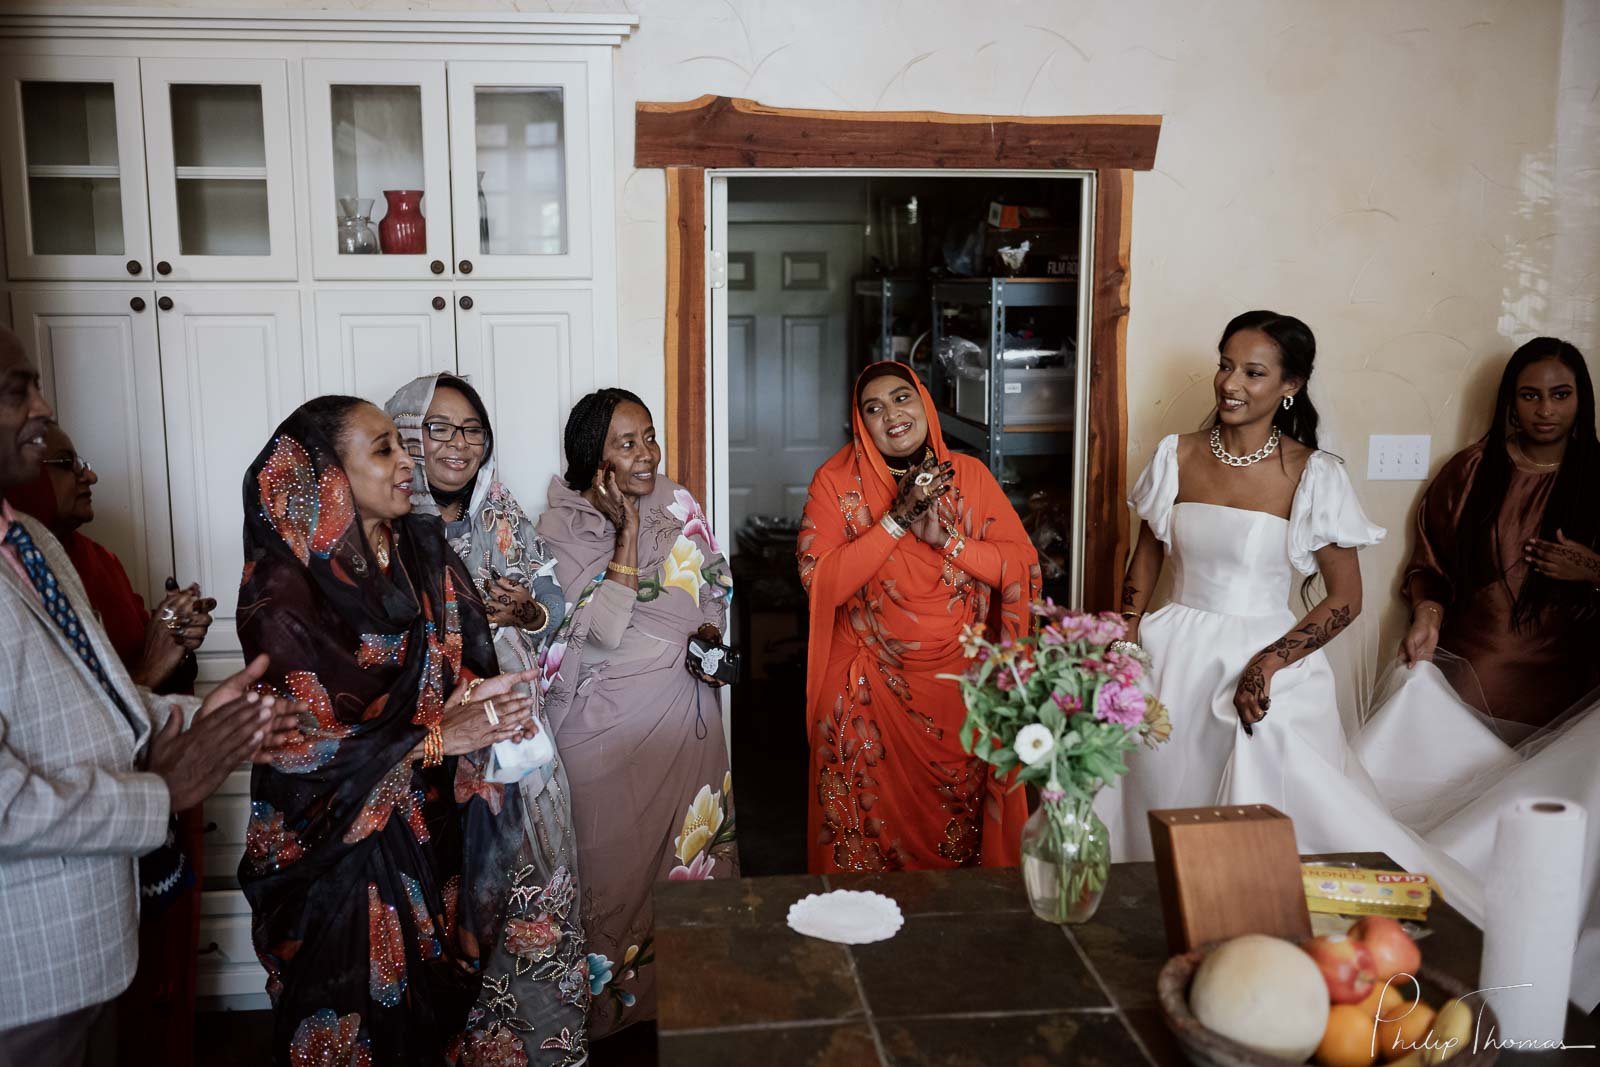 009 Hudson Bend Ranch Multicultural sudanese wedding Philip Thomas Photography